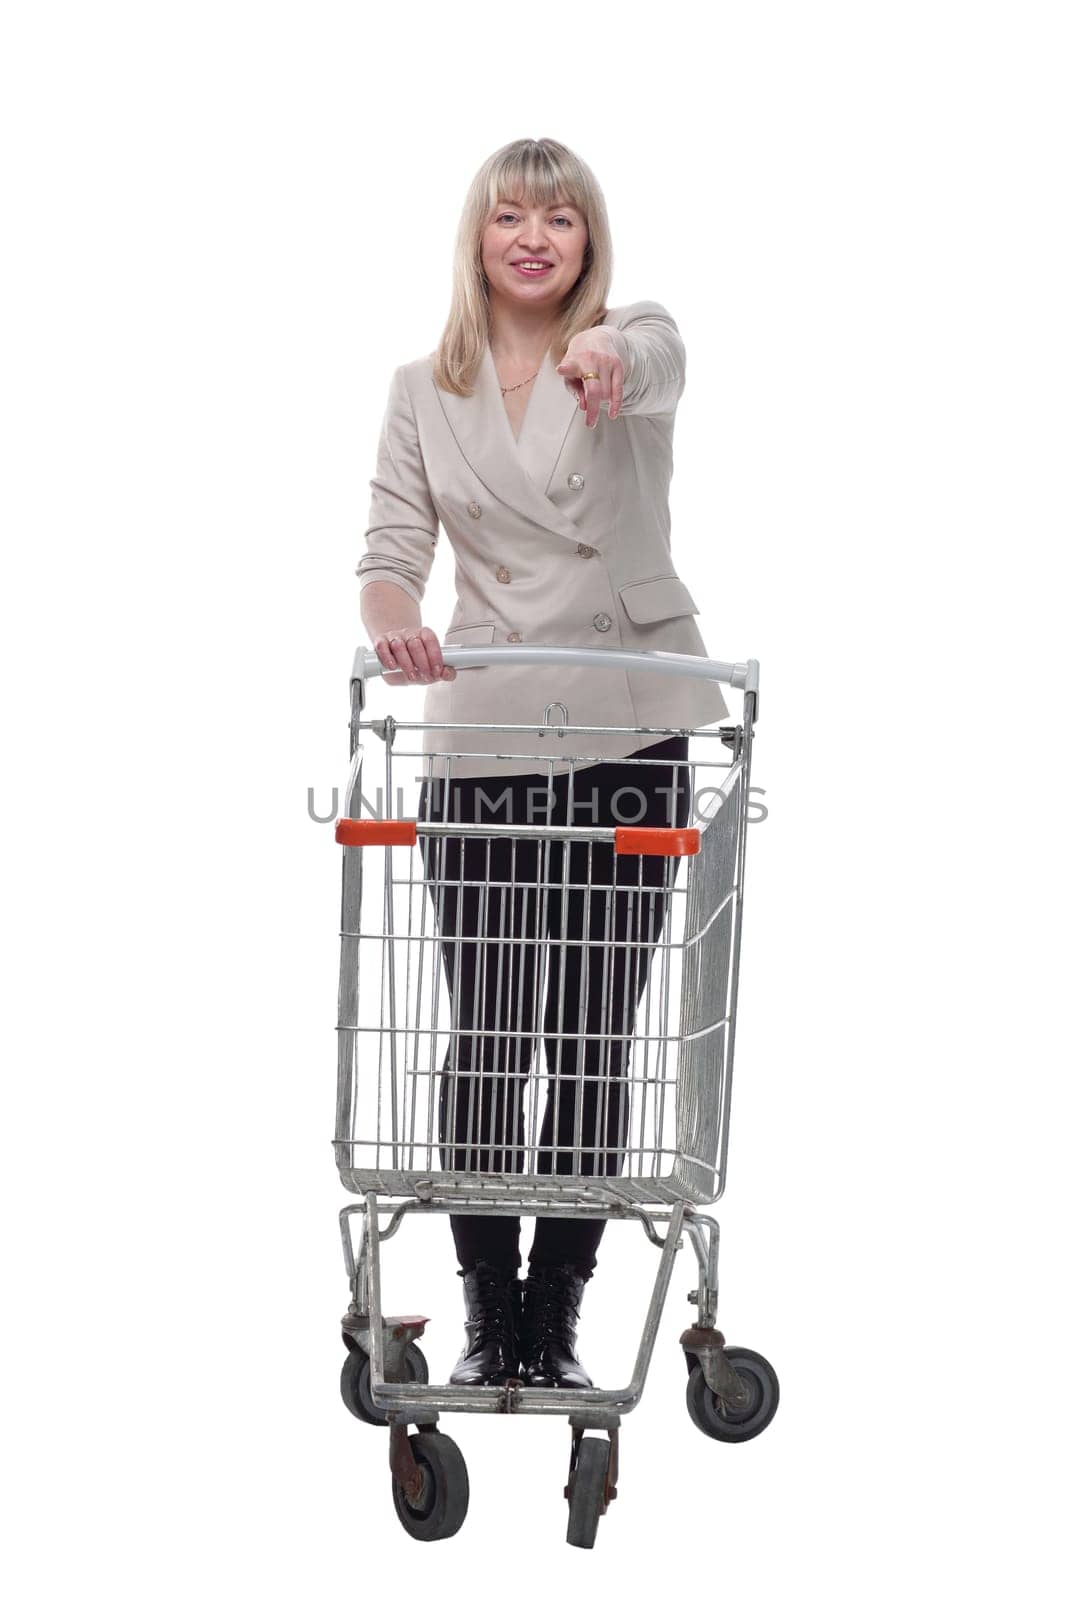 casual adult woman with shopping cart . isolated on a white background. by asdf